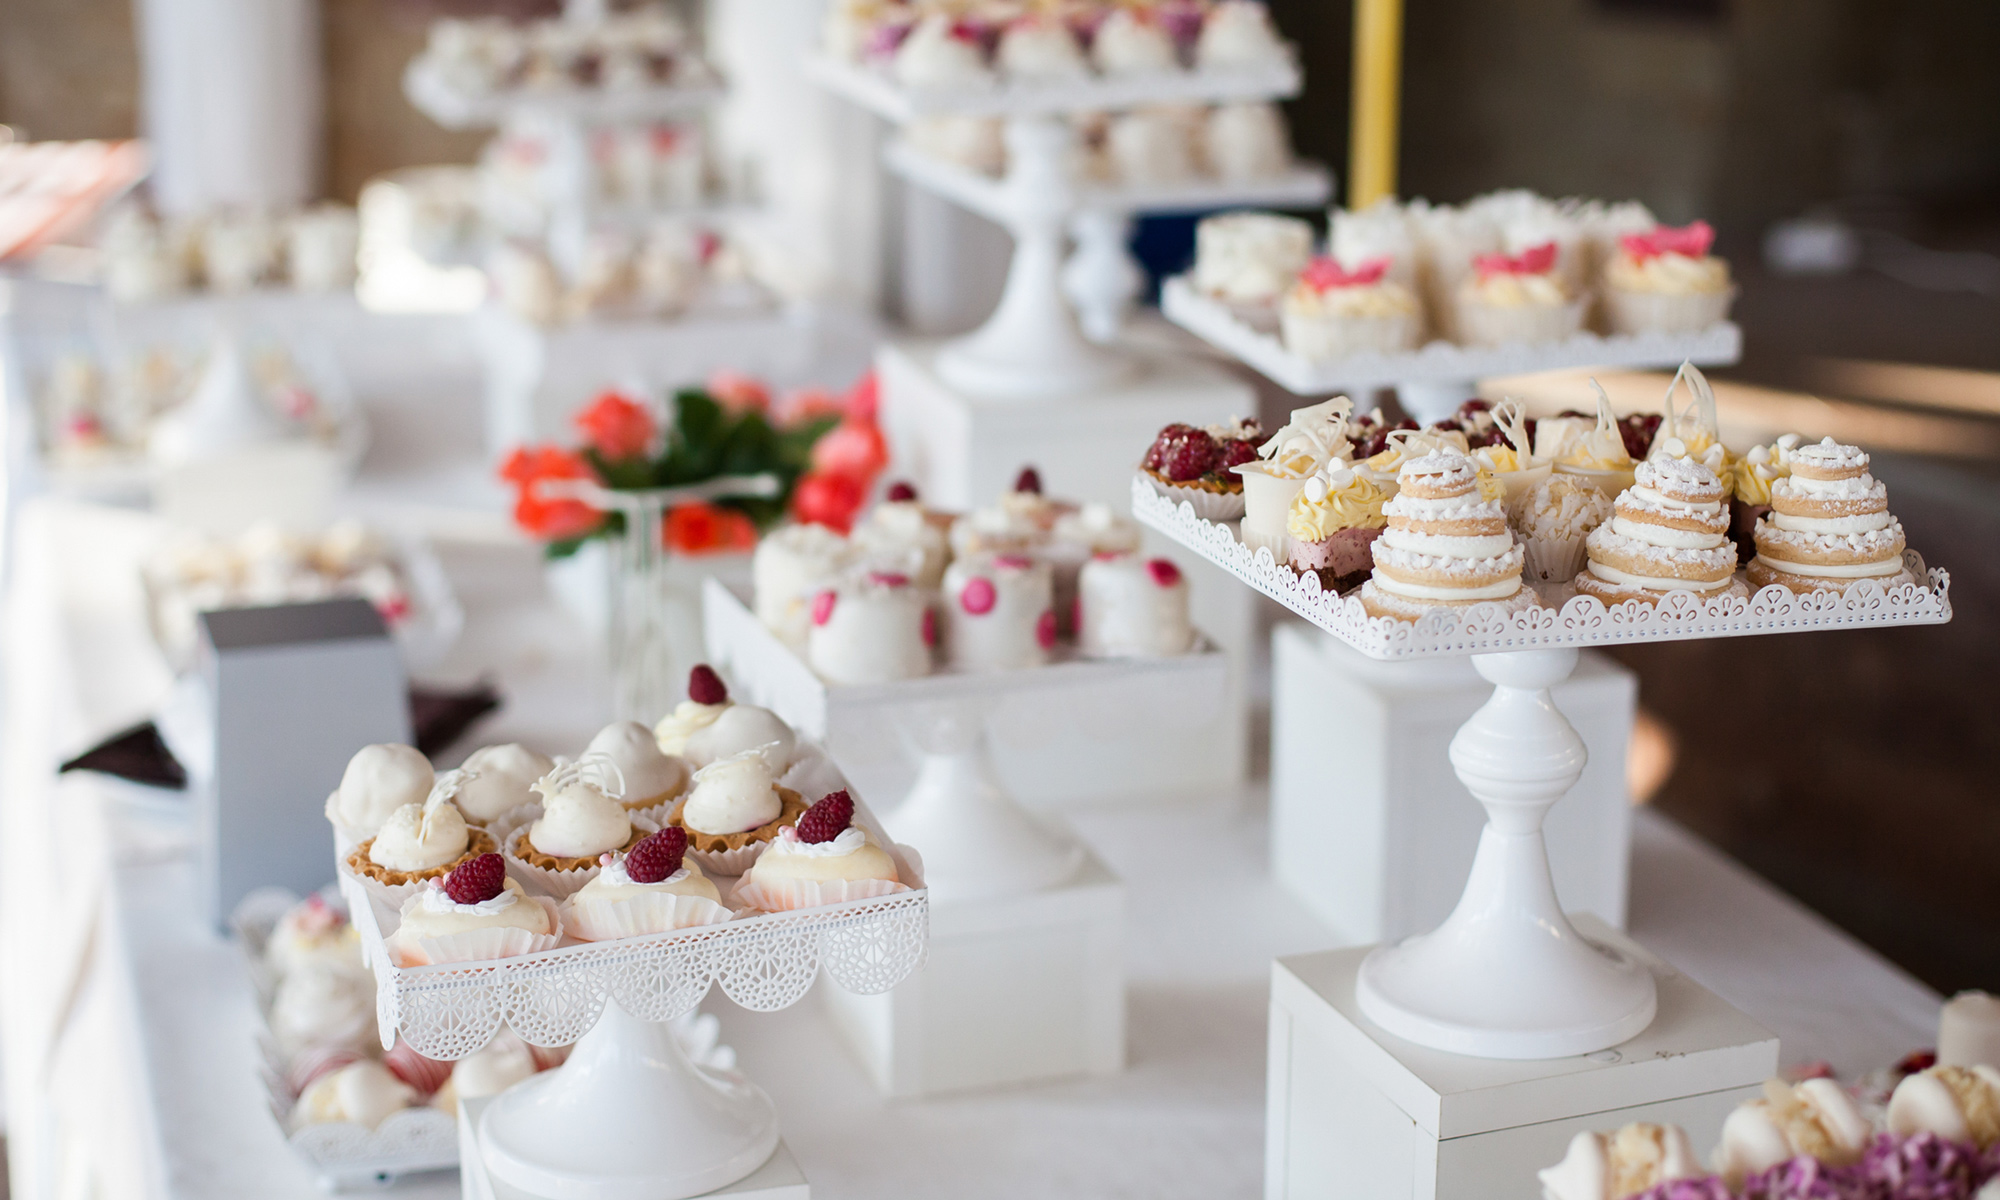 8 Wedding Food Trends Brides and Grooms Should Know